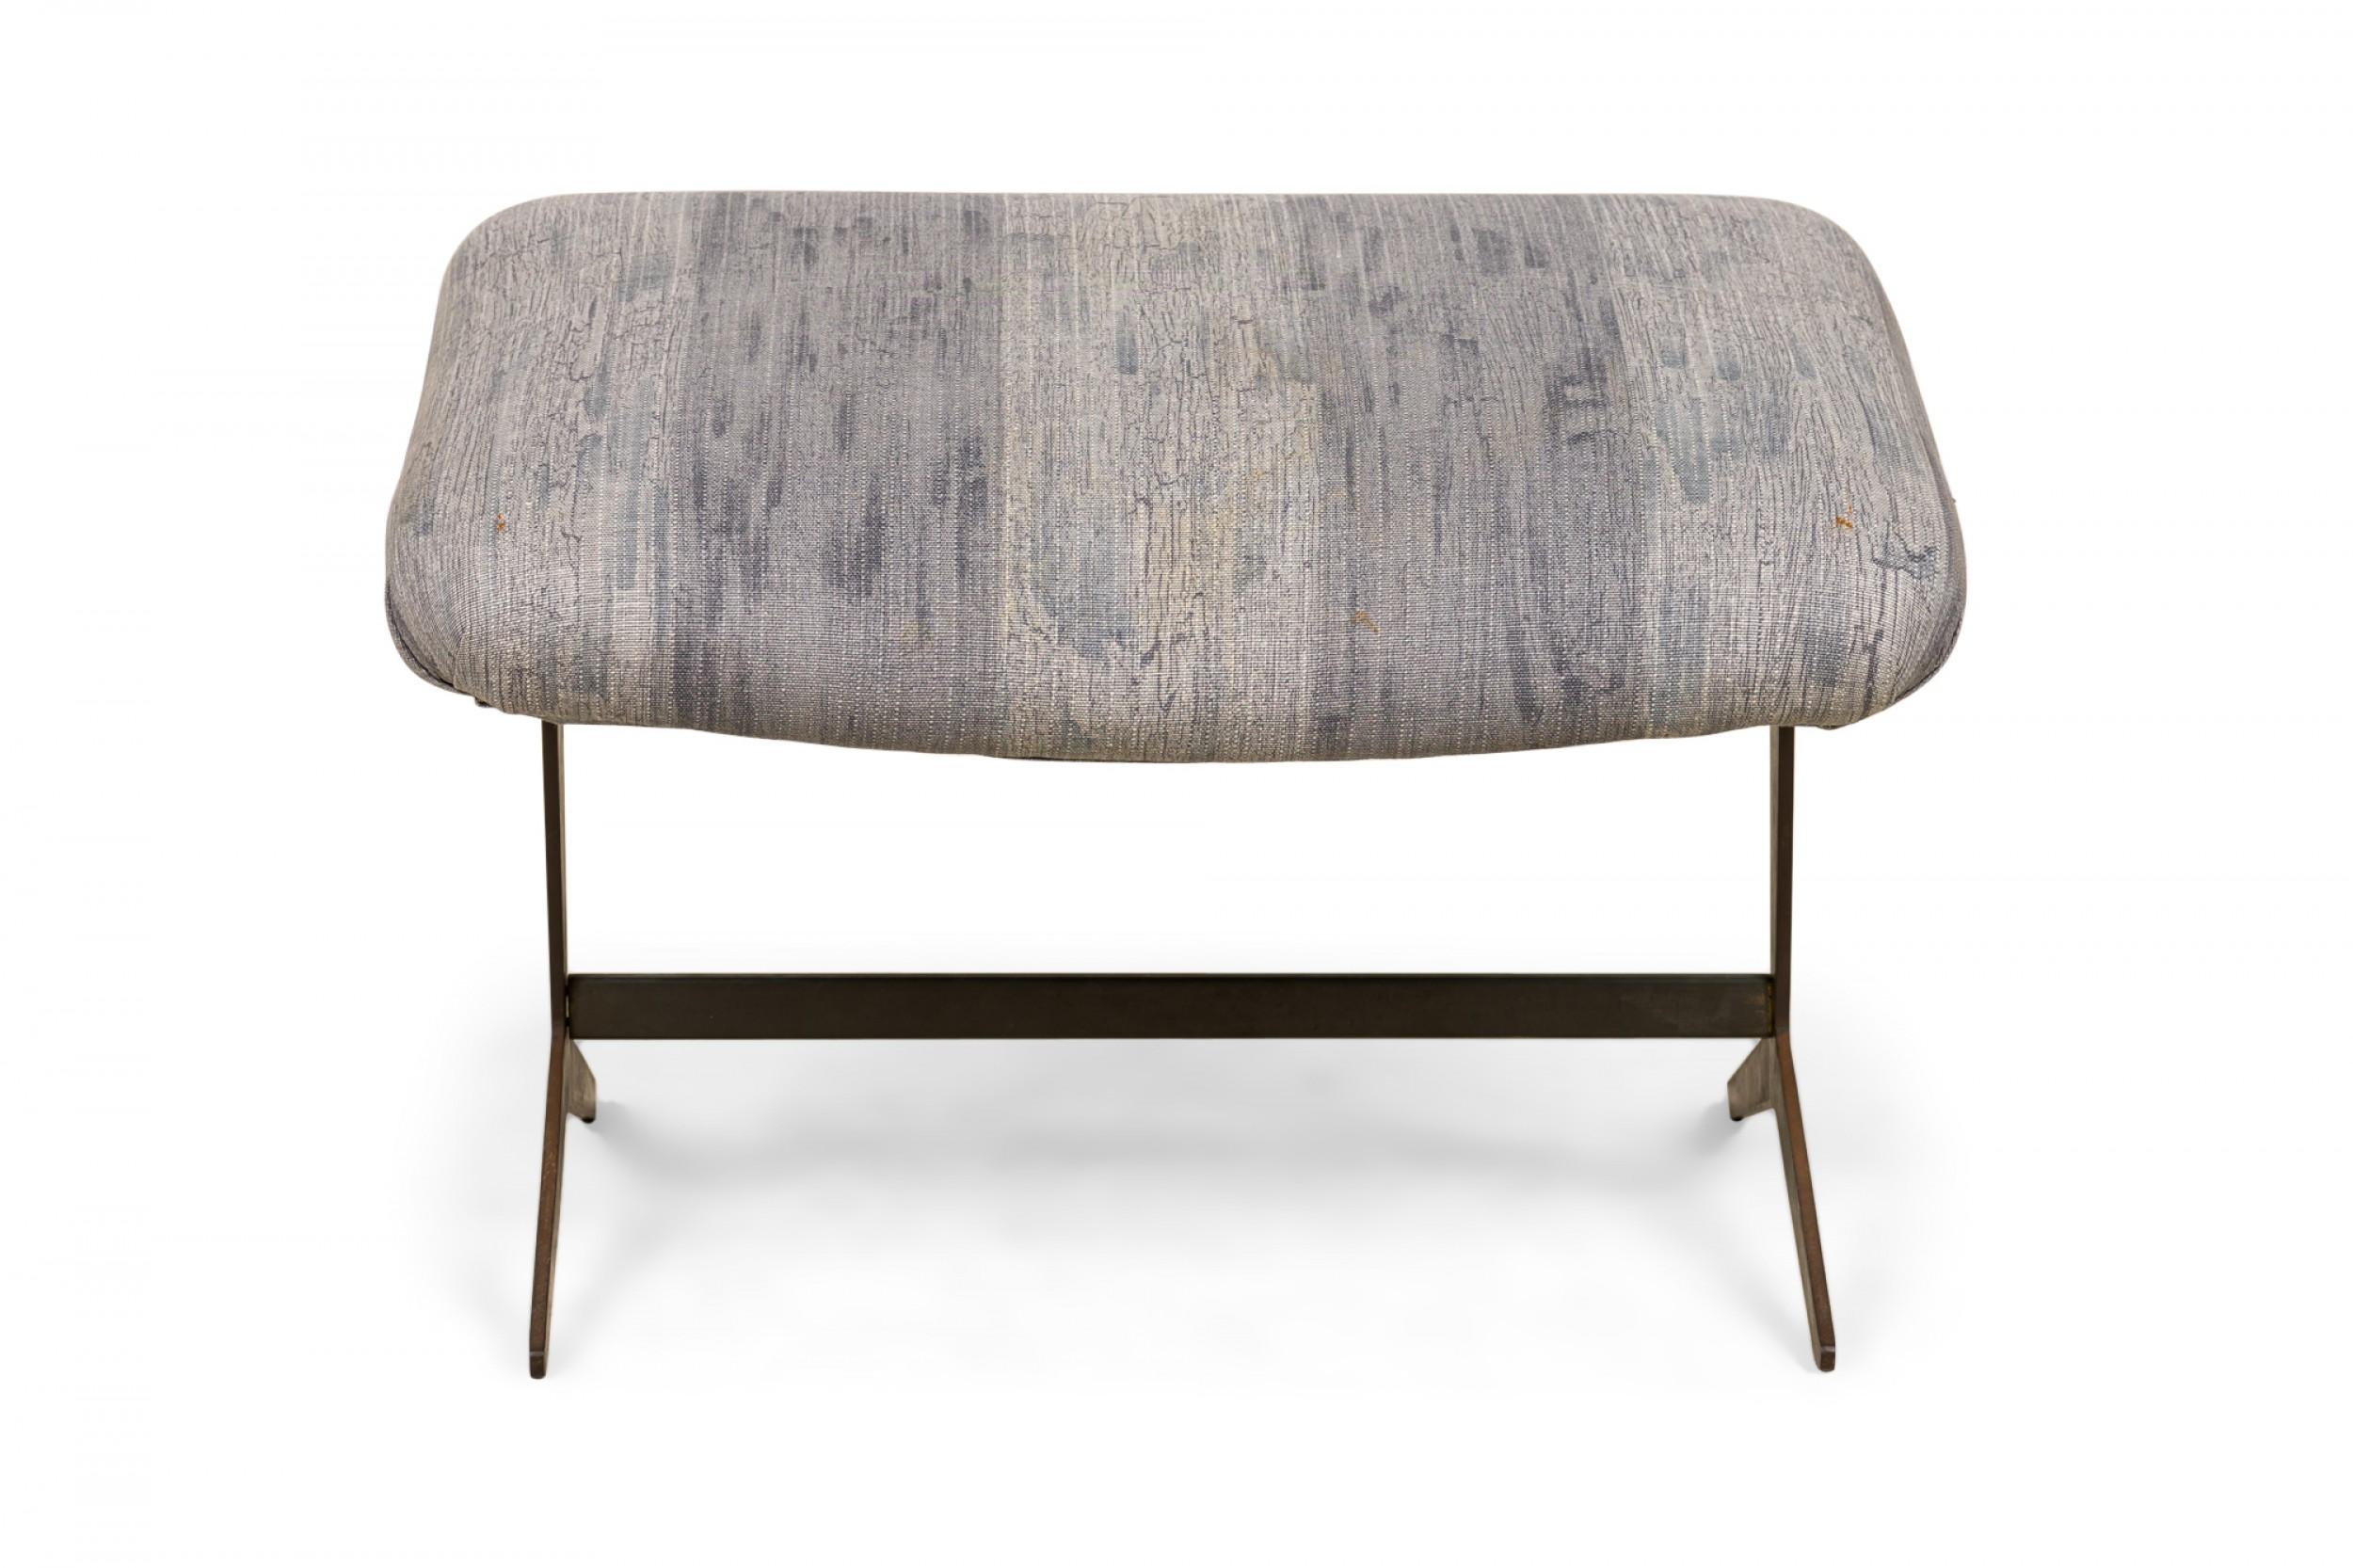 American mid-century scoop chair footstool with a faintly striped grey upholstered rectangular top resting on a brass stretcher base. (SELIG)